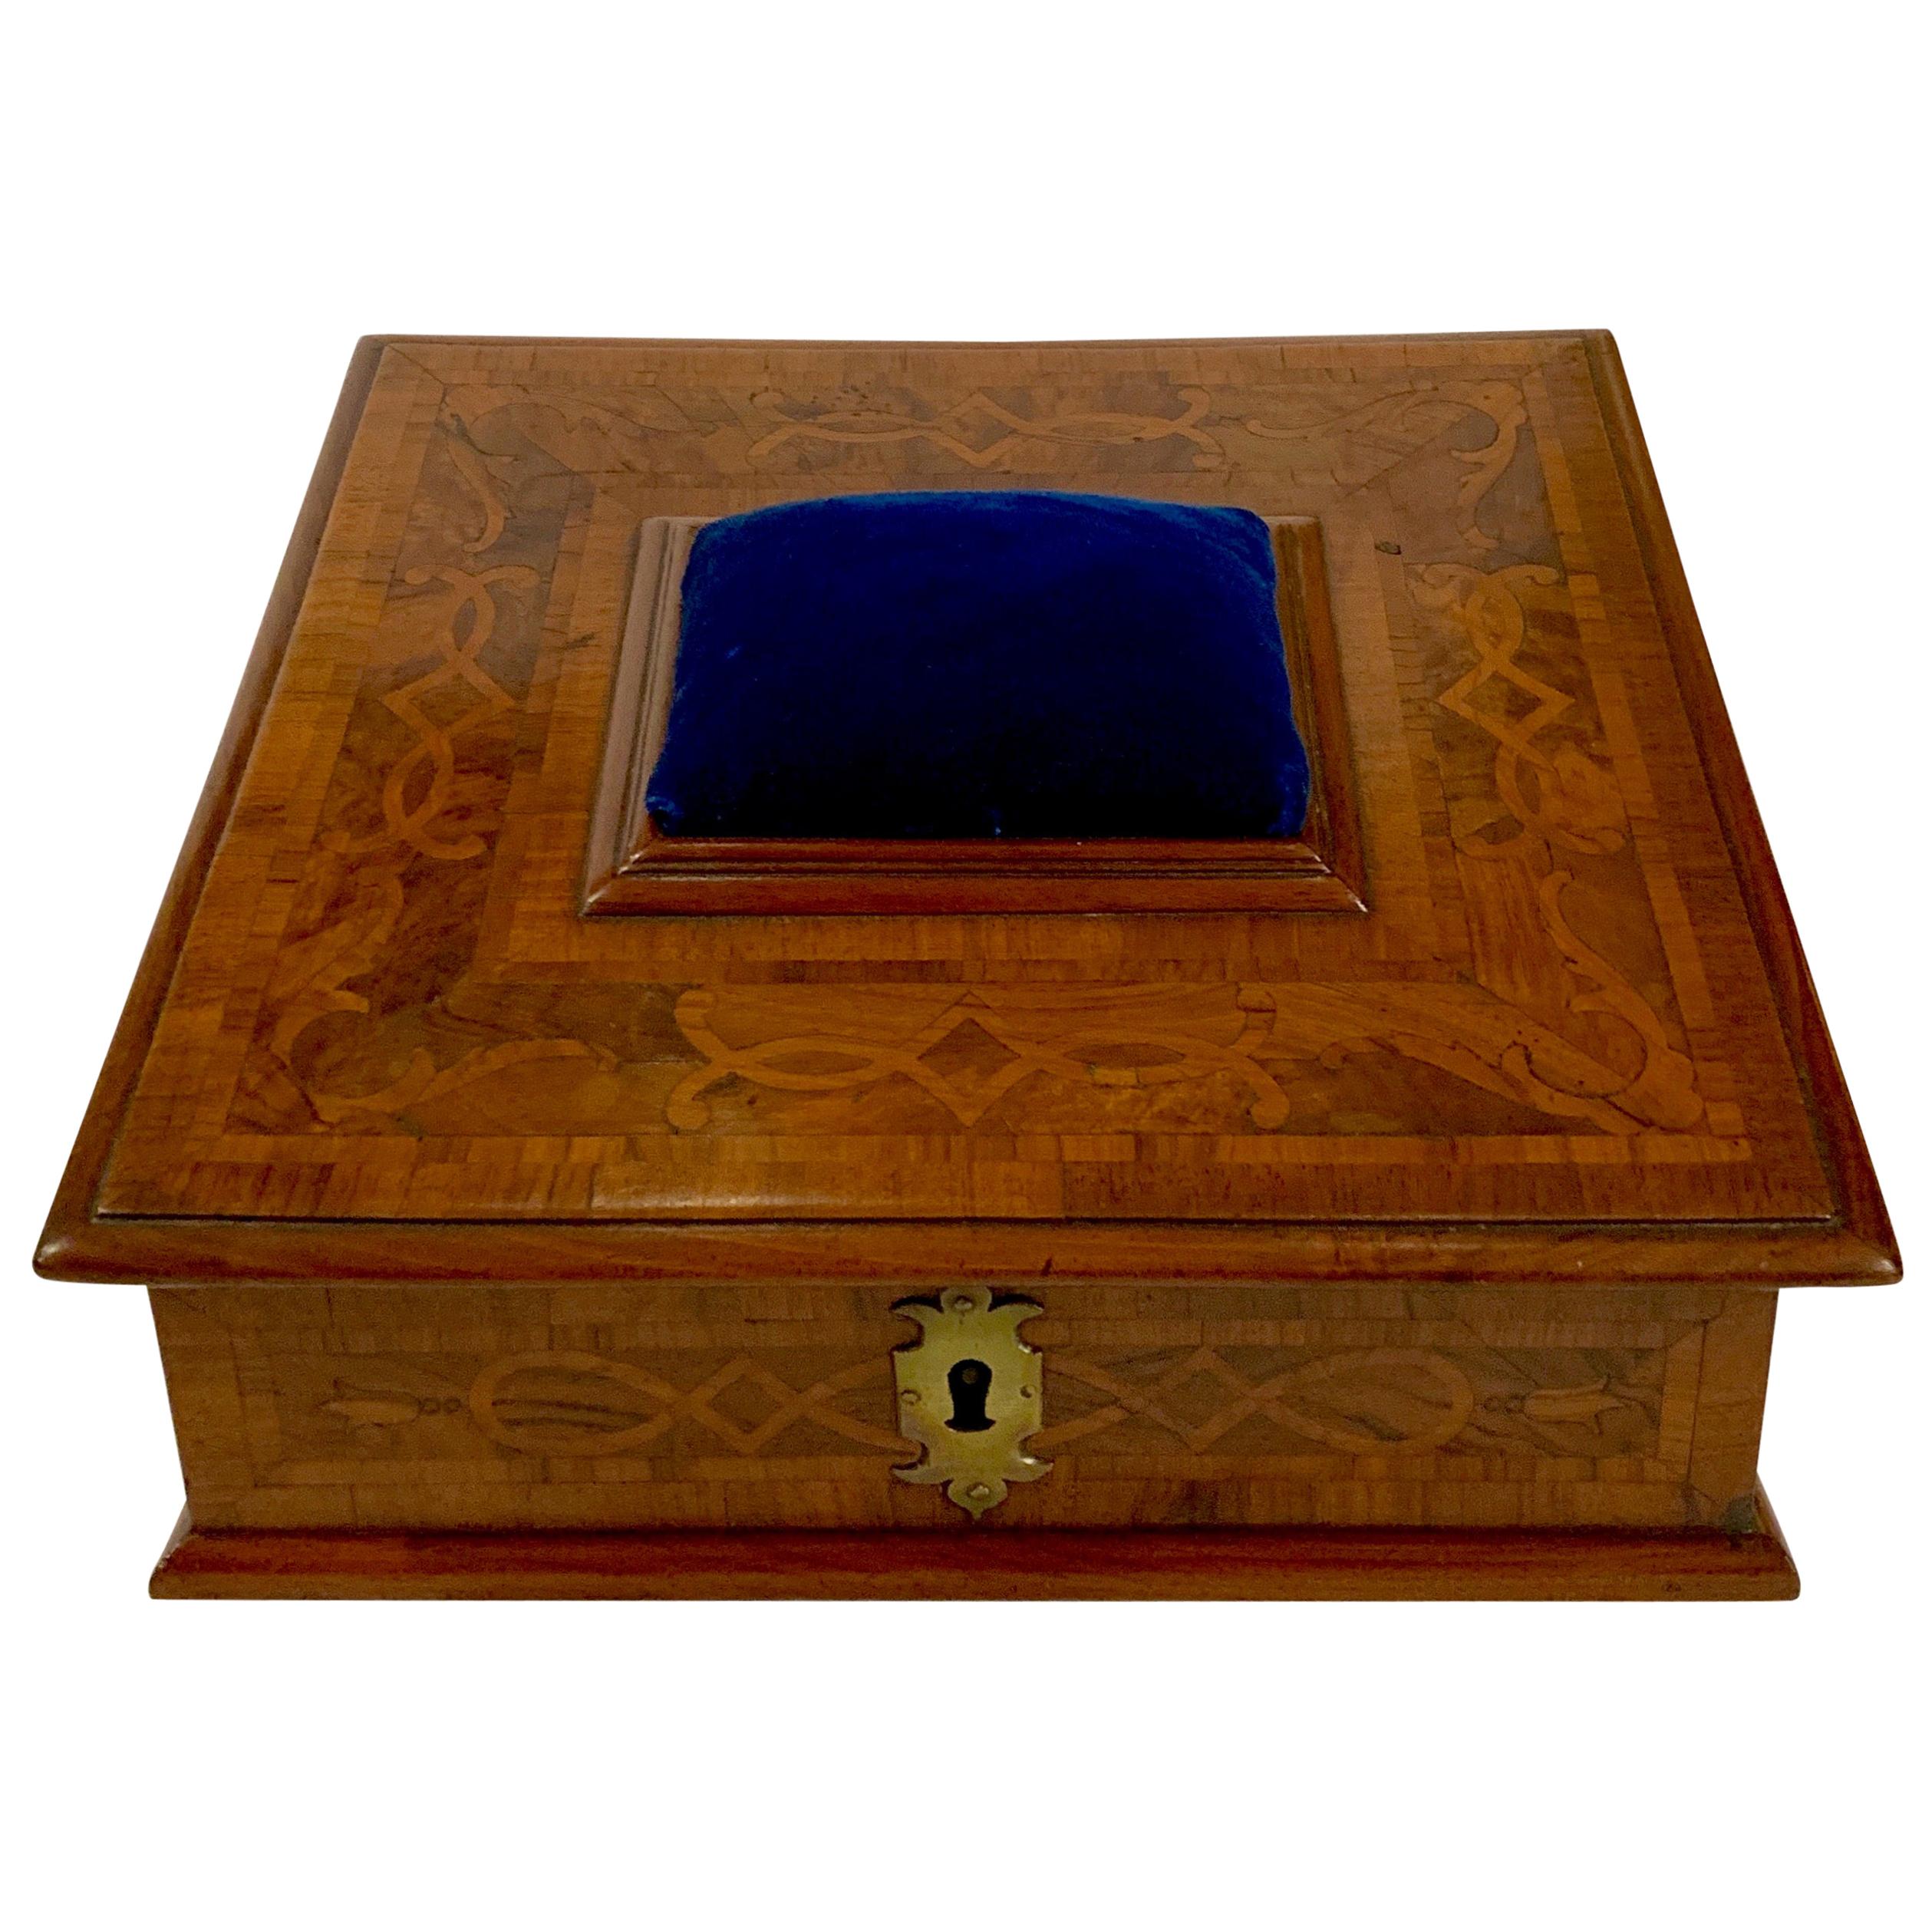 Antique English Sewing Box or Jewel Box, circa 1850-1860 For Sale